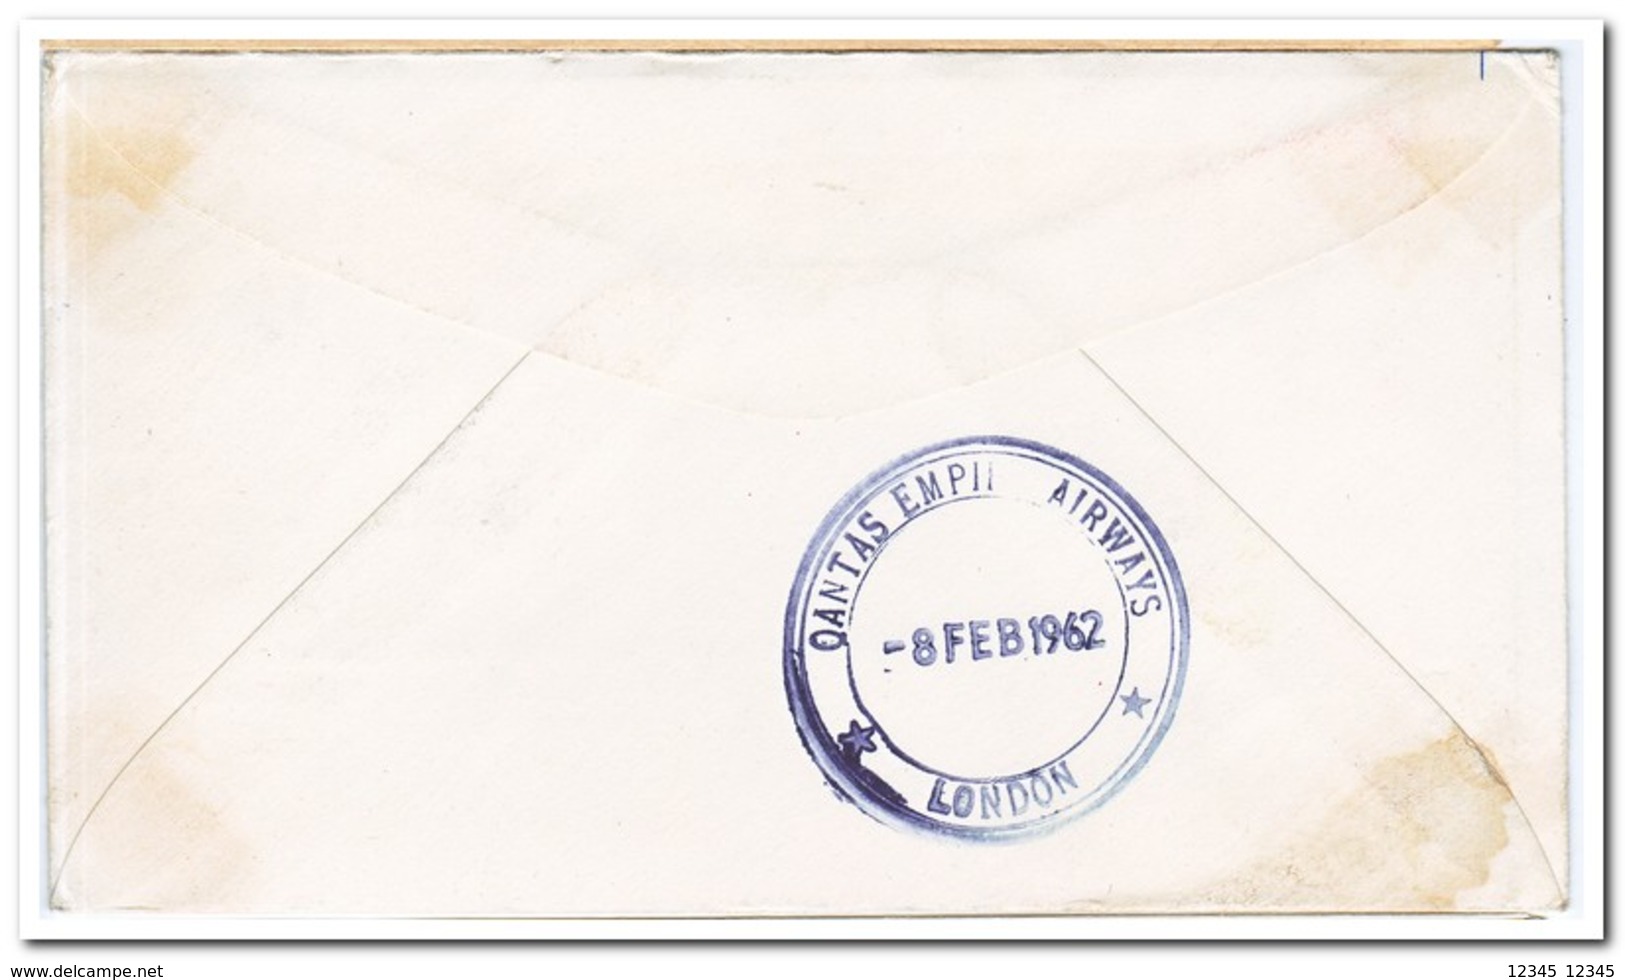 Indonesië 1962, Letter From Djakarta To London With Boeing V-Jet - Indonesia